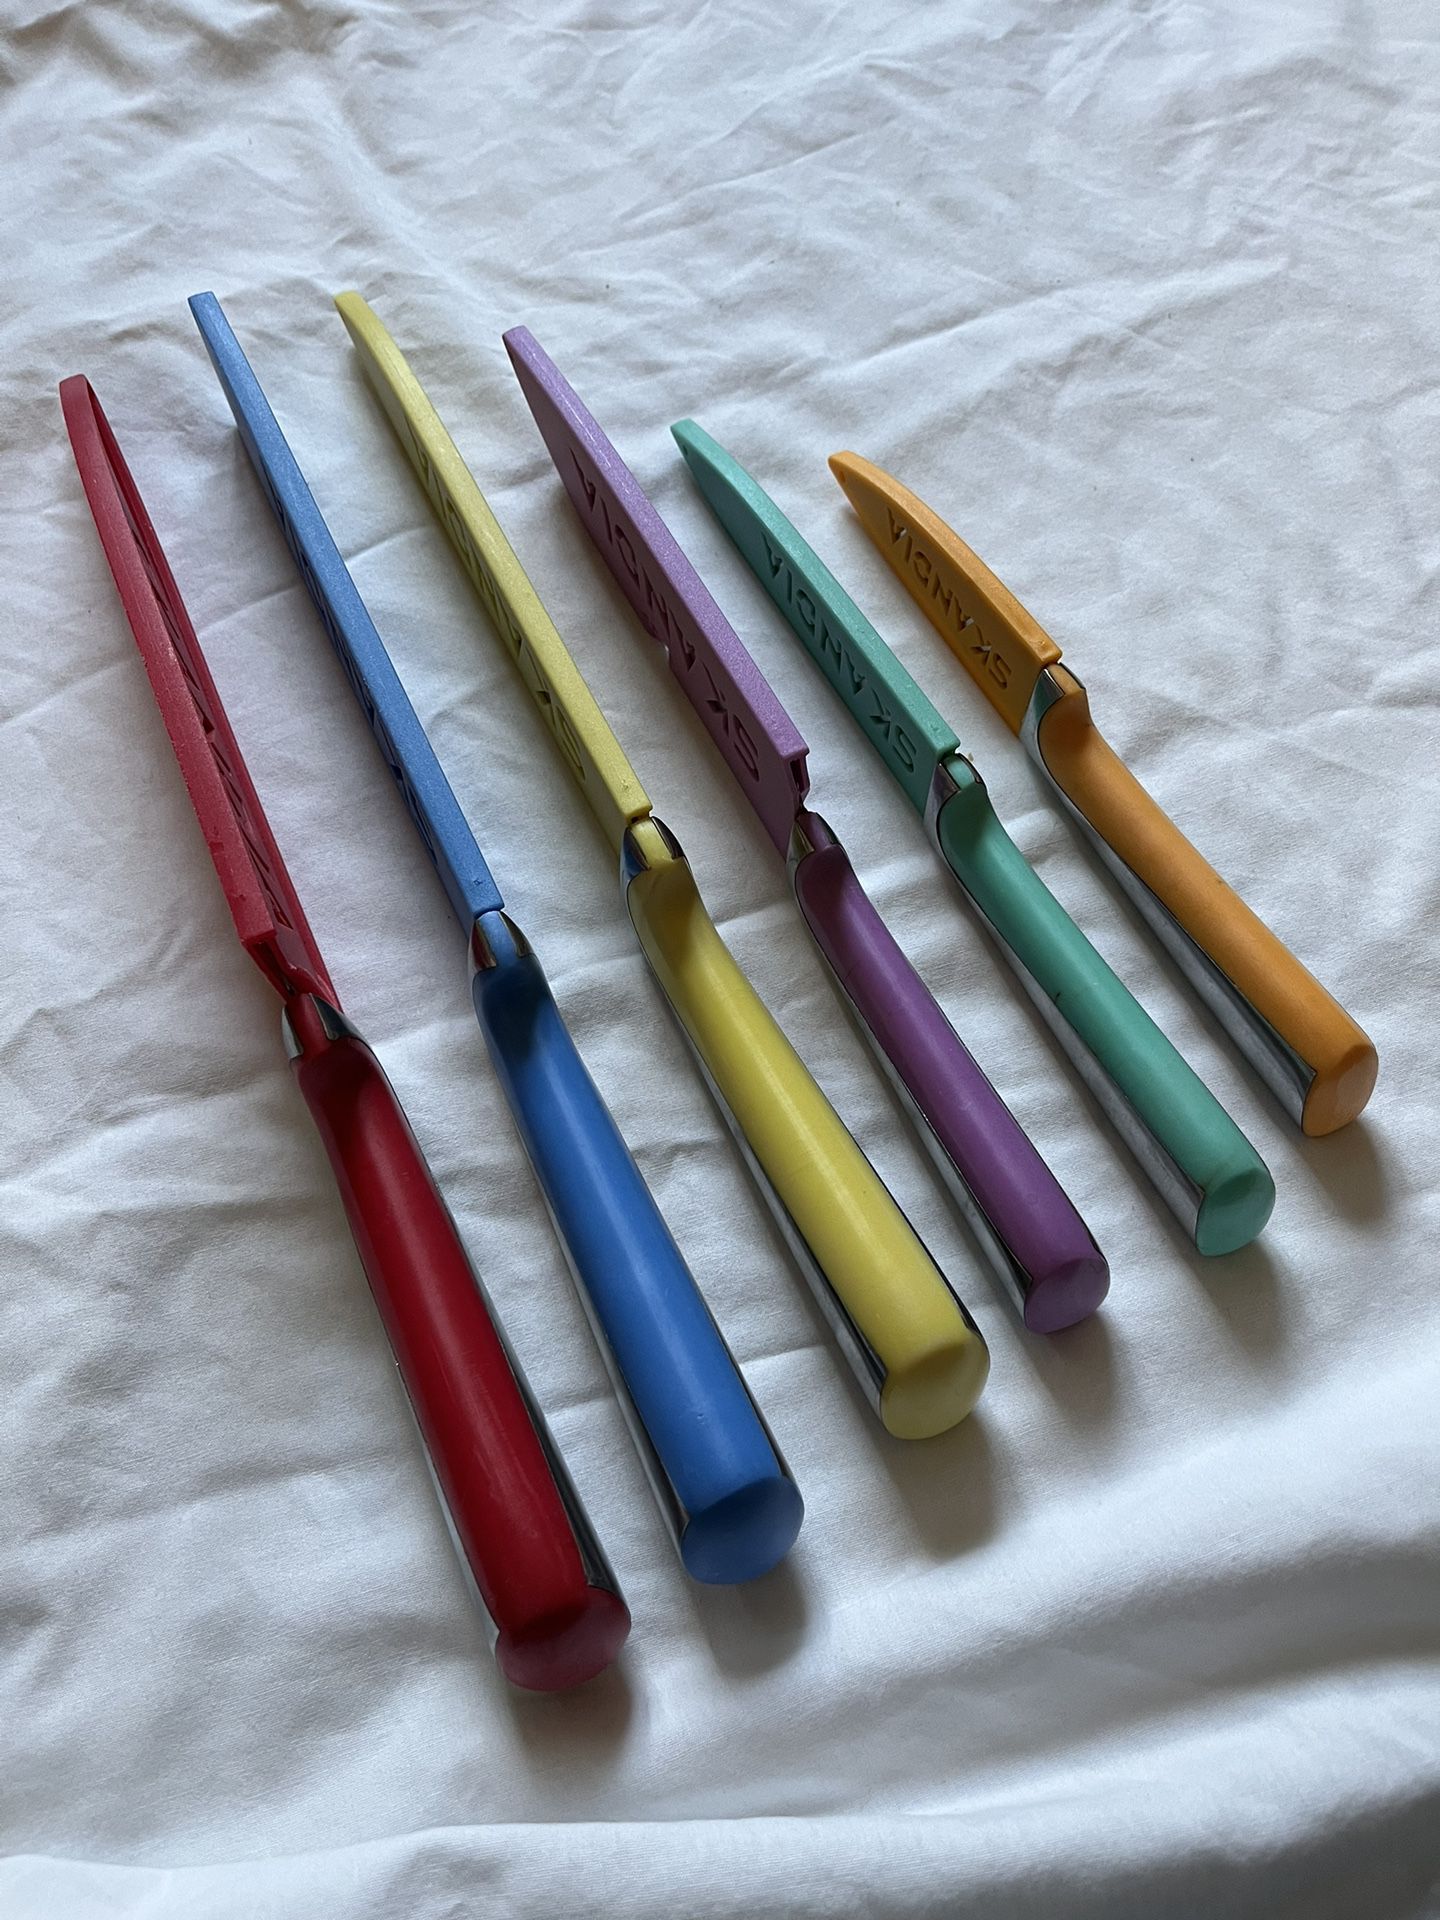 Tomodachi 6 Pc. Colorful Kitchen Knife Set with Matching Cases - Pre-Owned  for Sale in Brisbane, CA - OfferUp